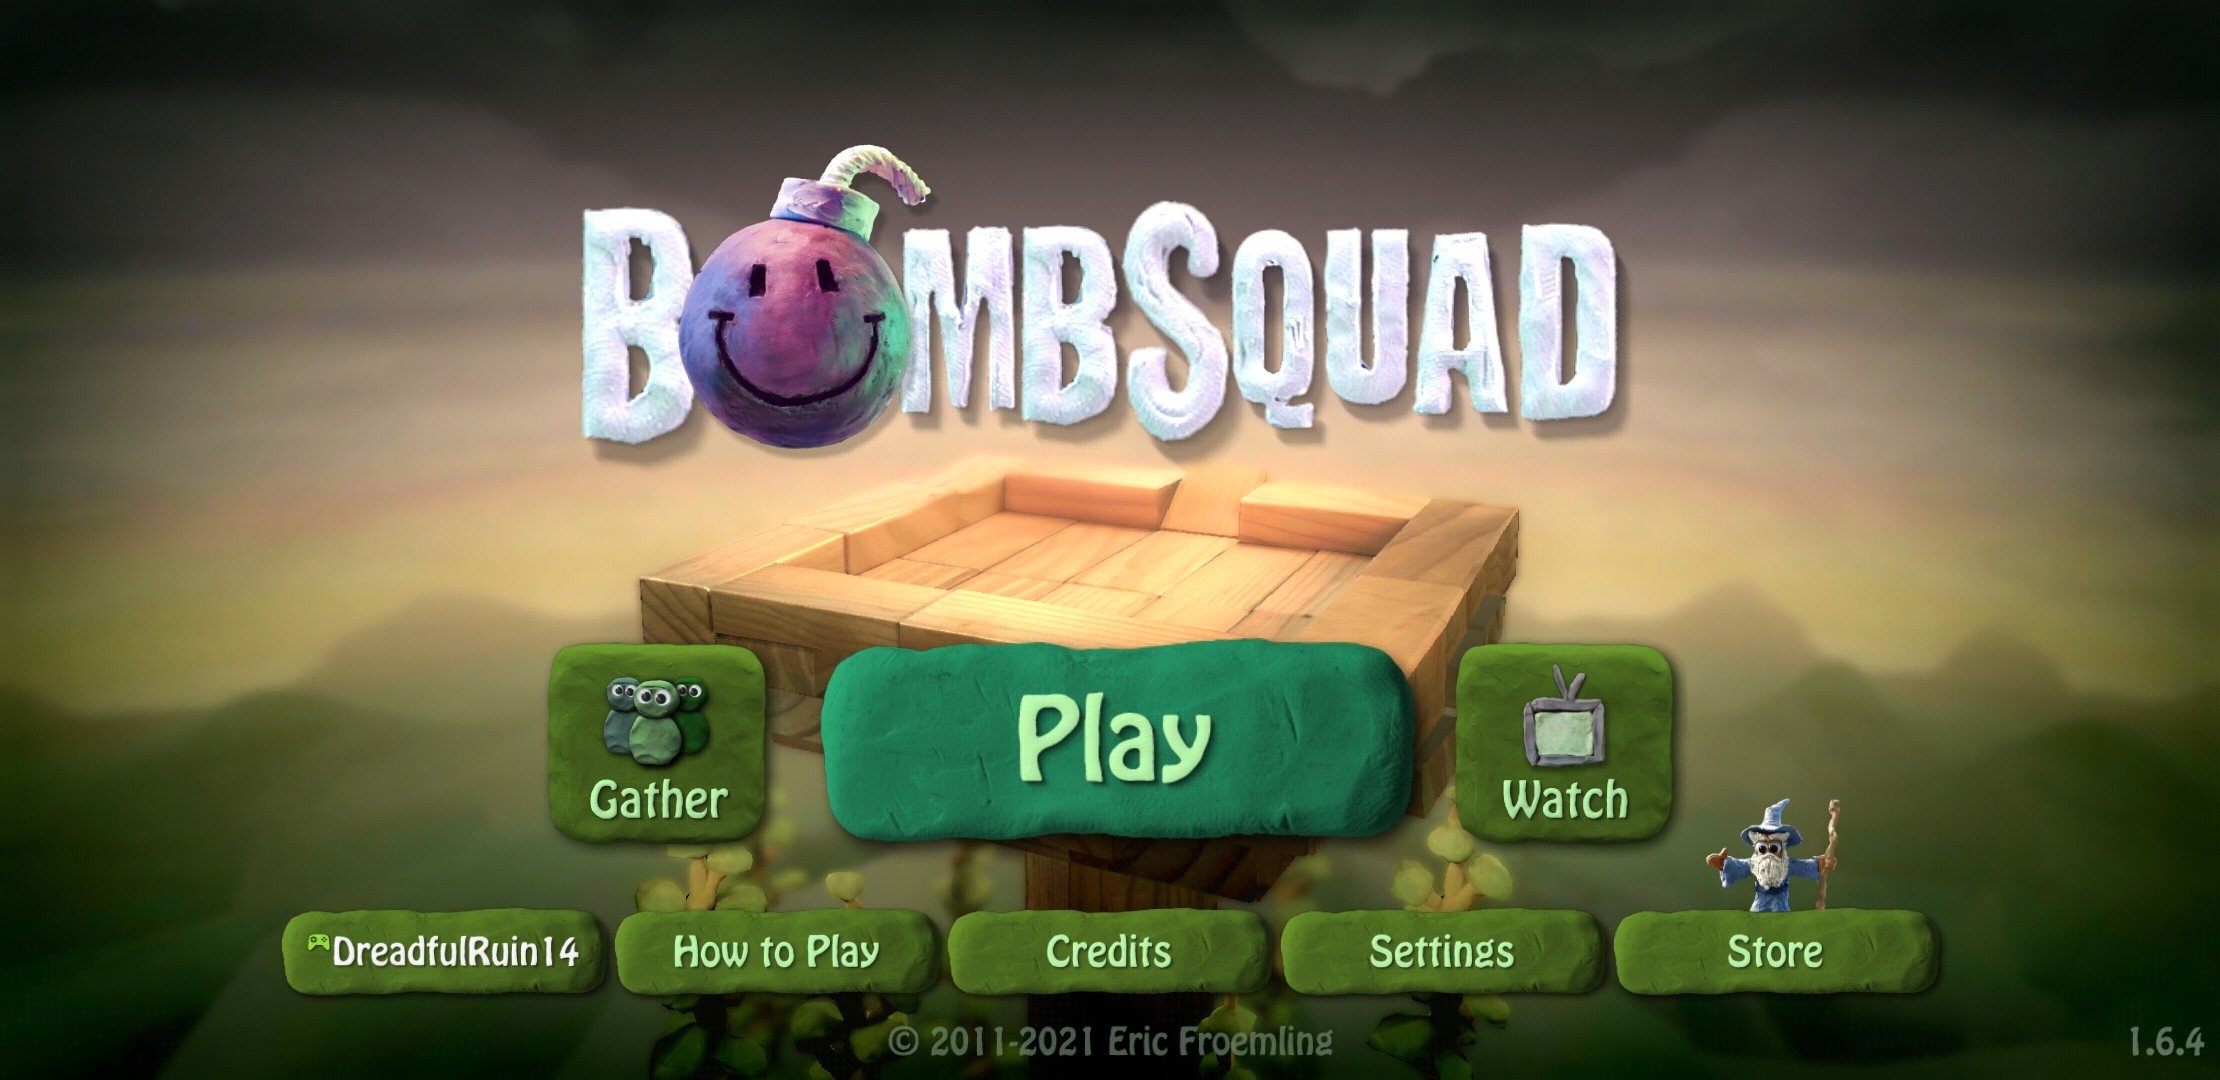 inventor of bombsquad app